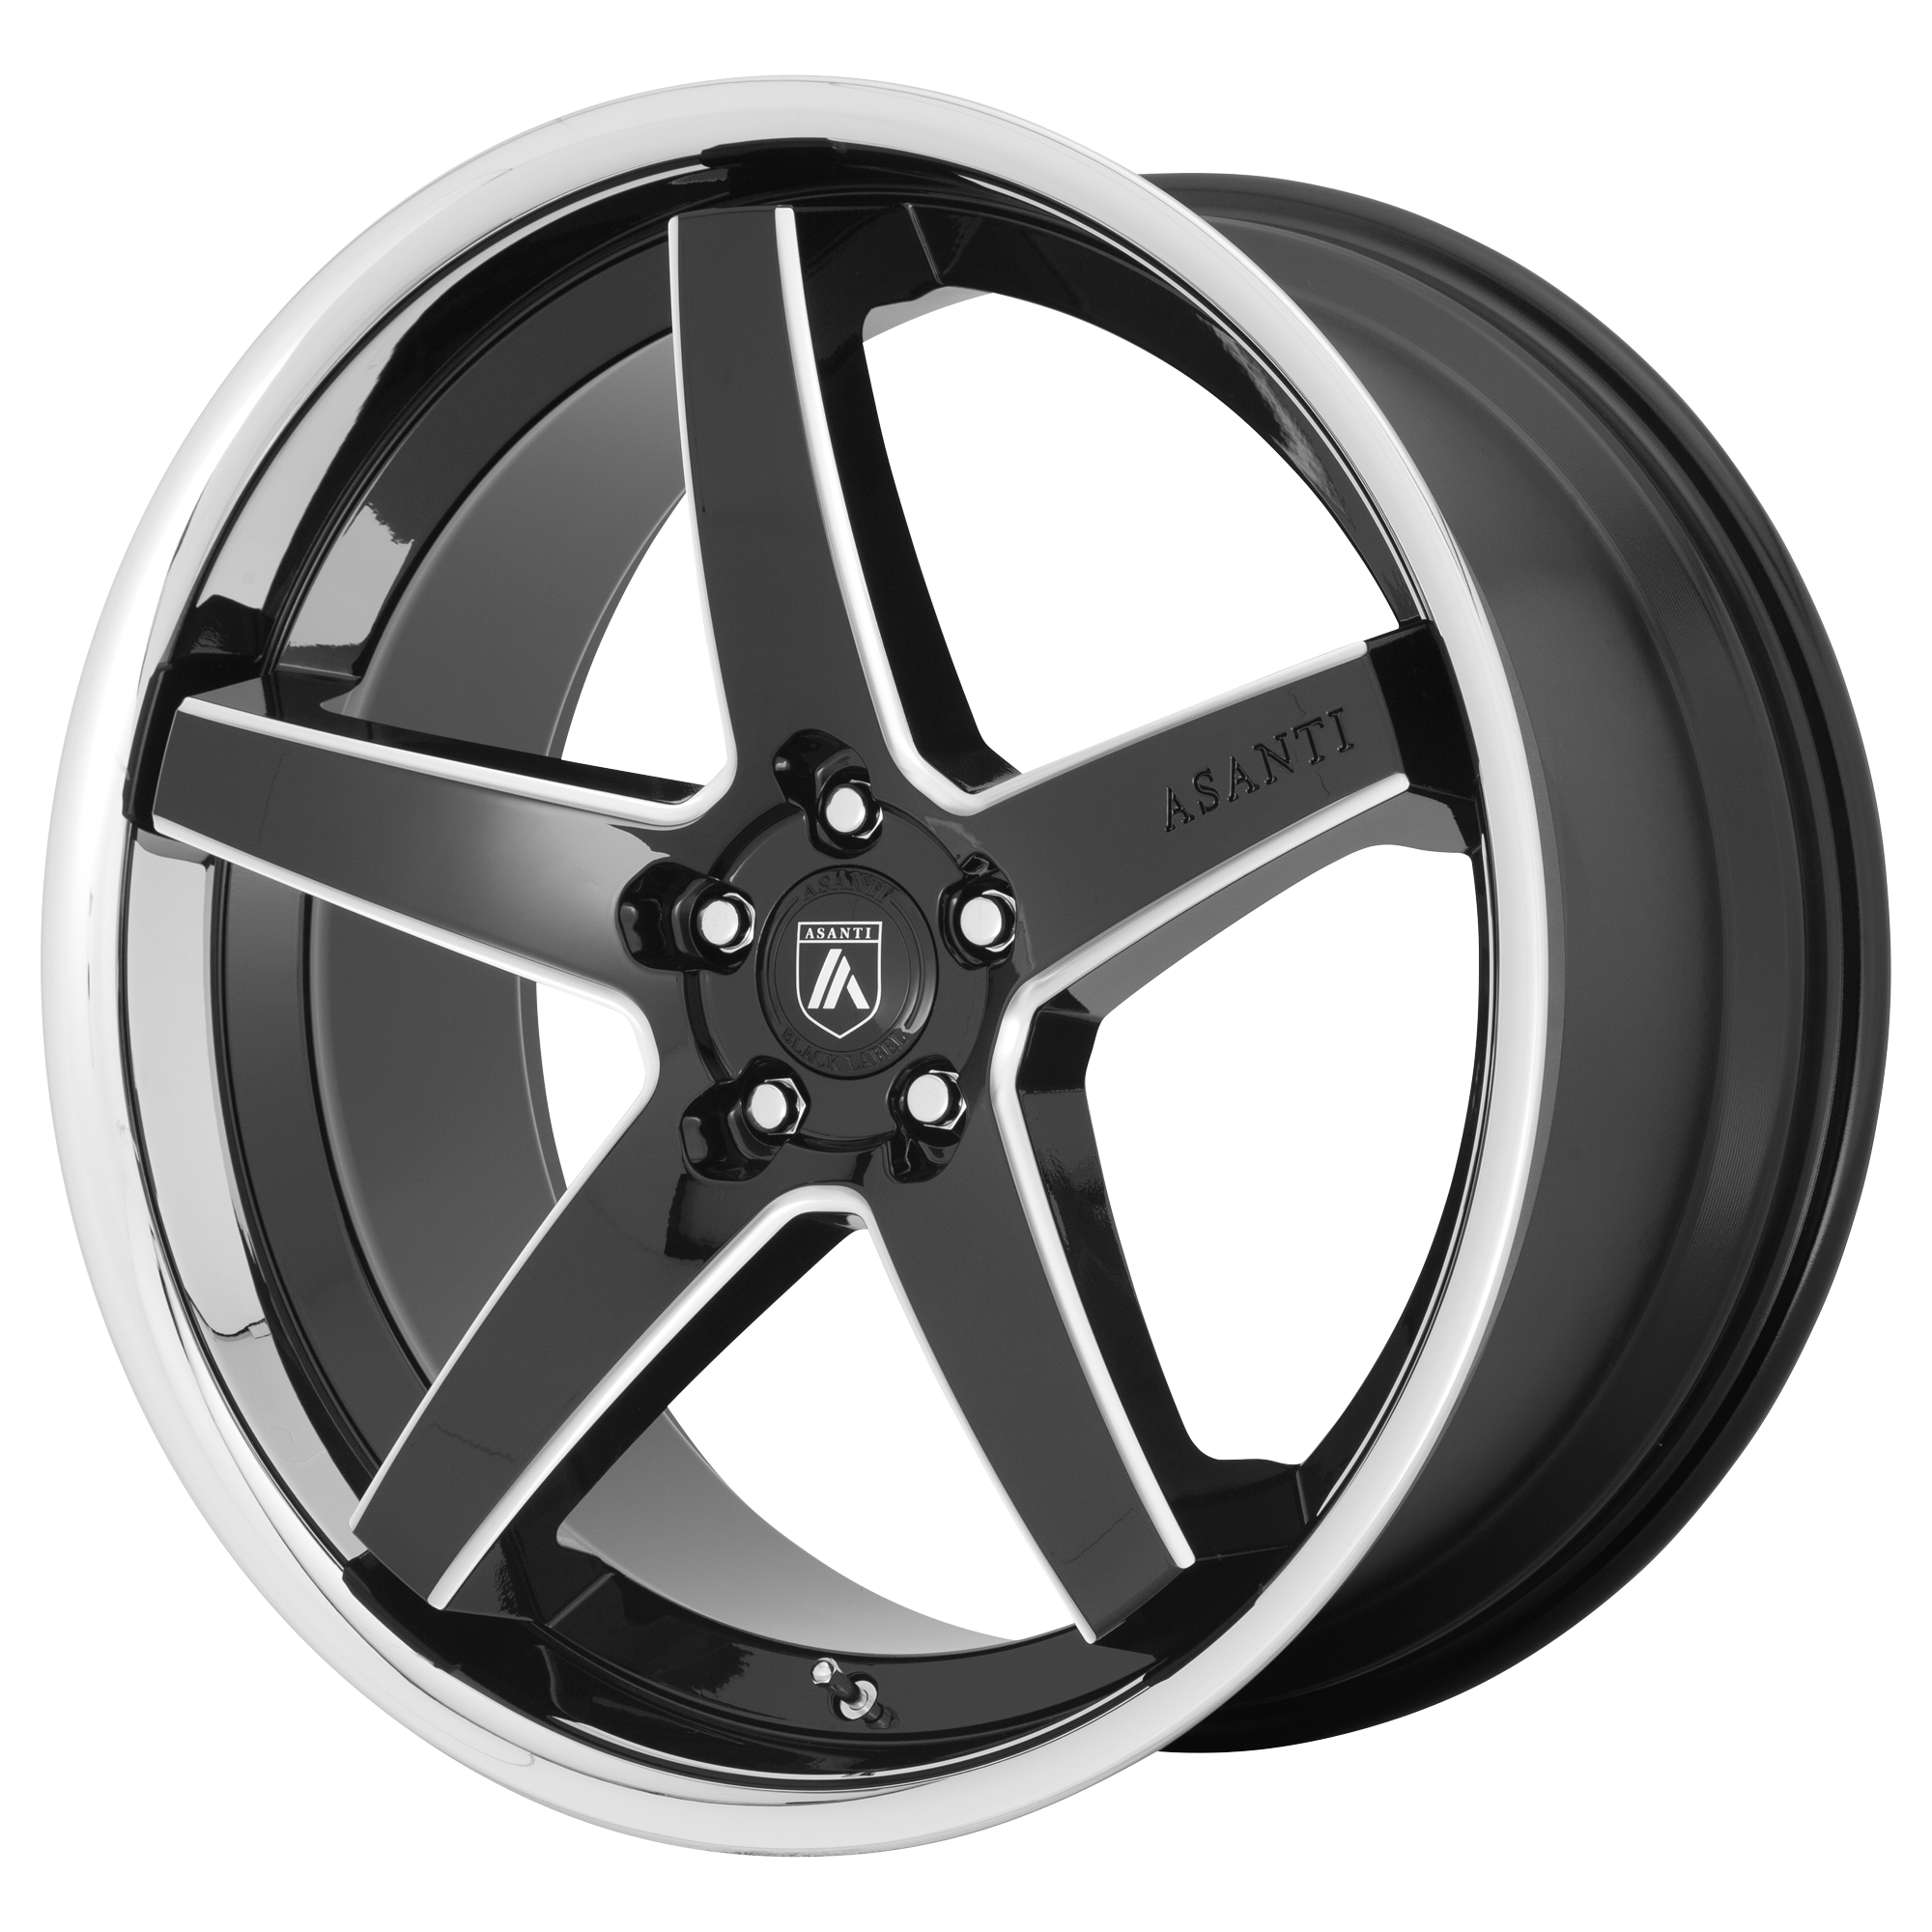 REGAL 20x10.5 5x114.30 GLOSS BLACK MILLED W/ CHROME LIP (38 mm) - Tires and Engine Performance